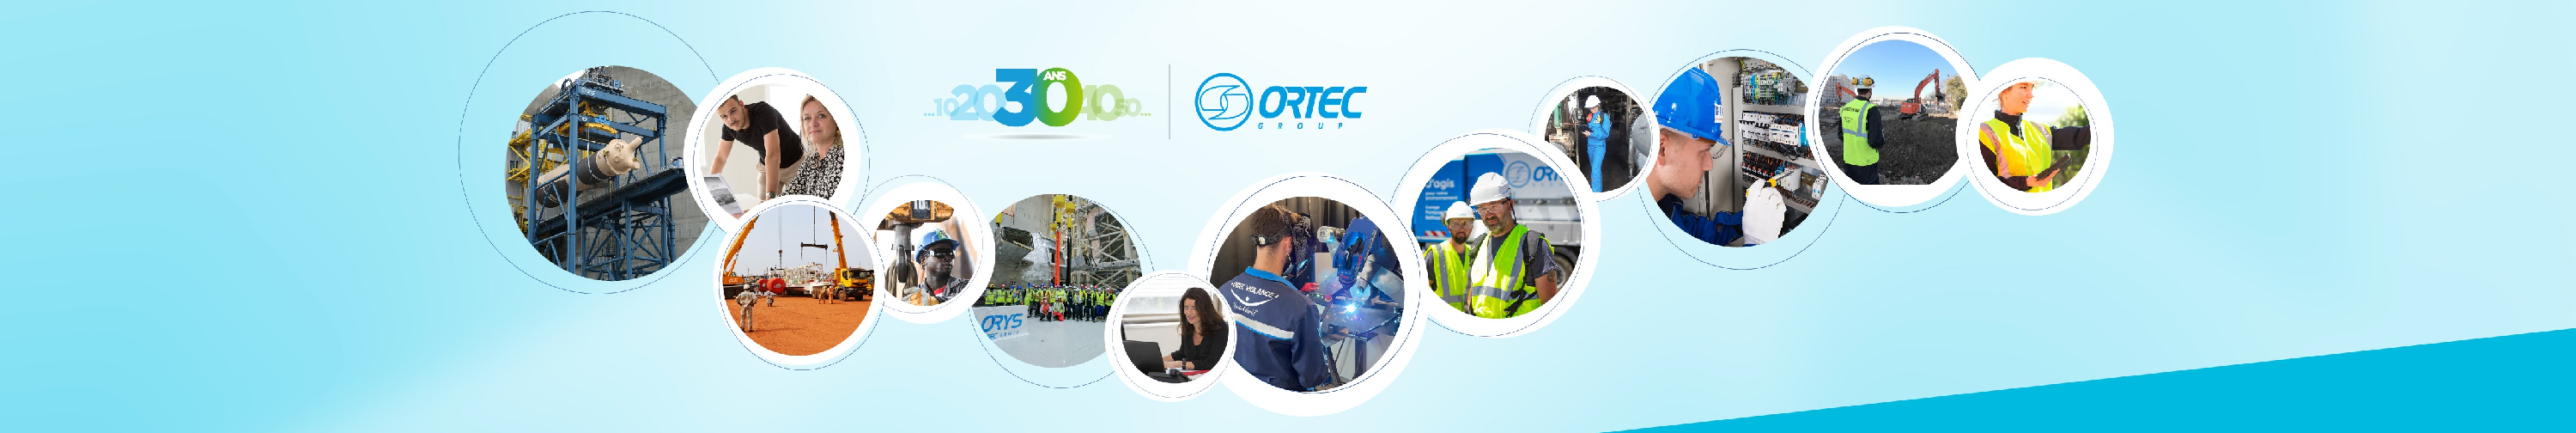 ORTEC SERVICES background